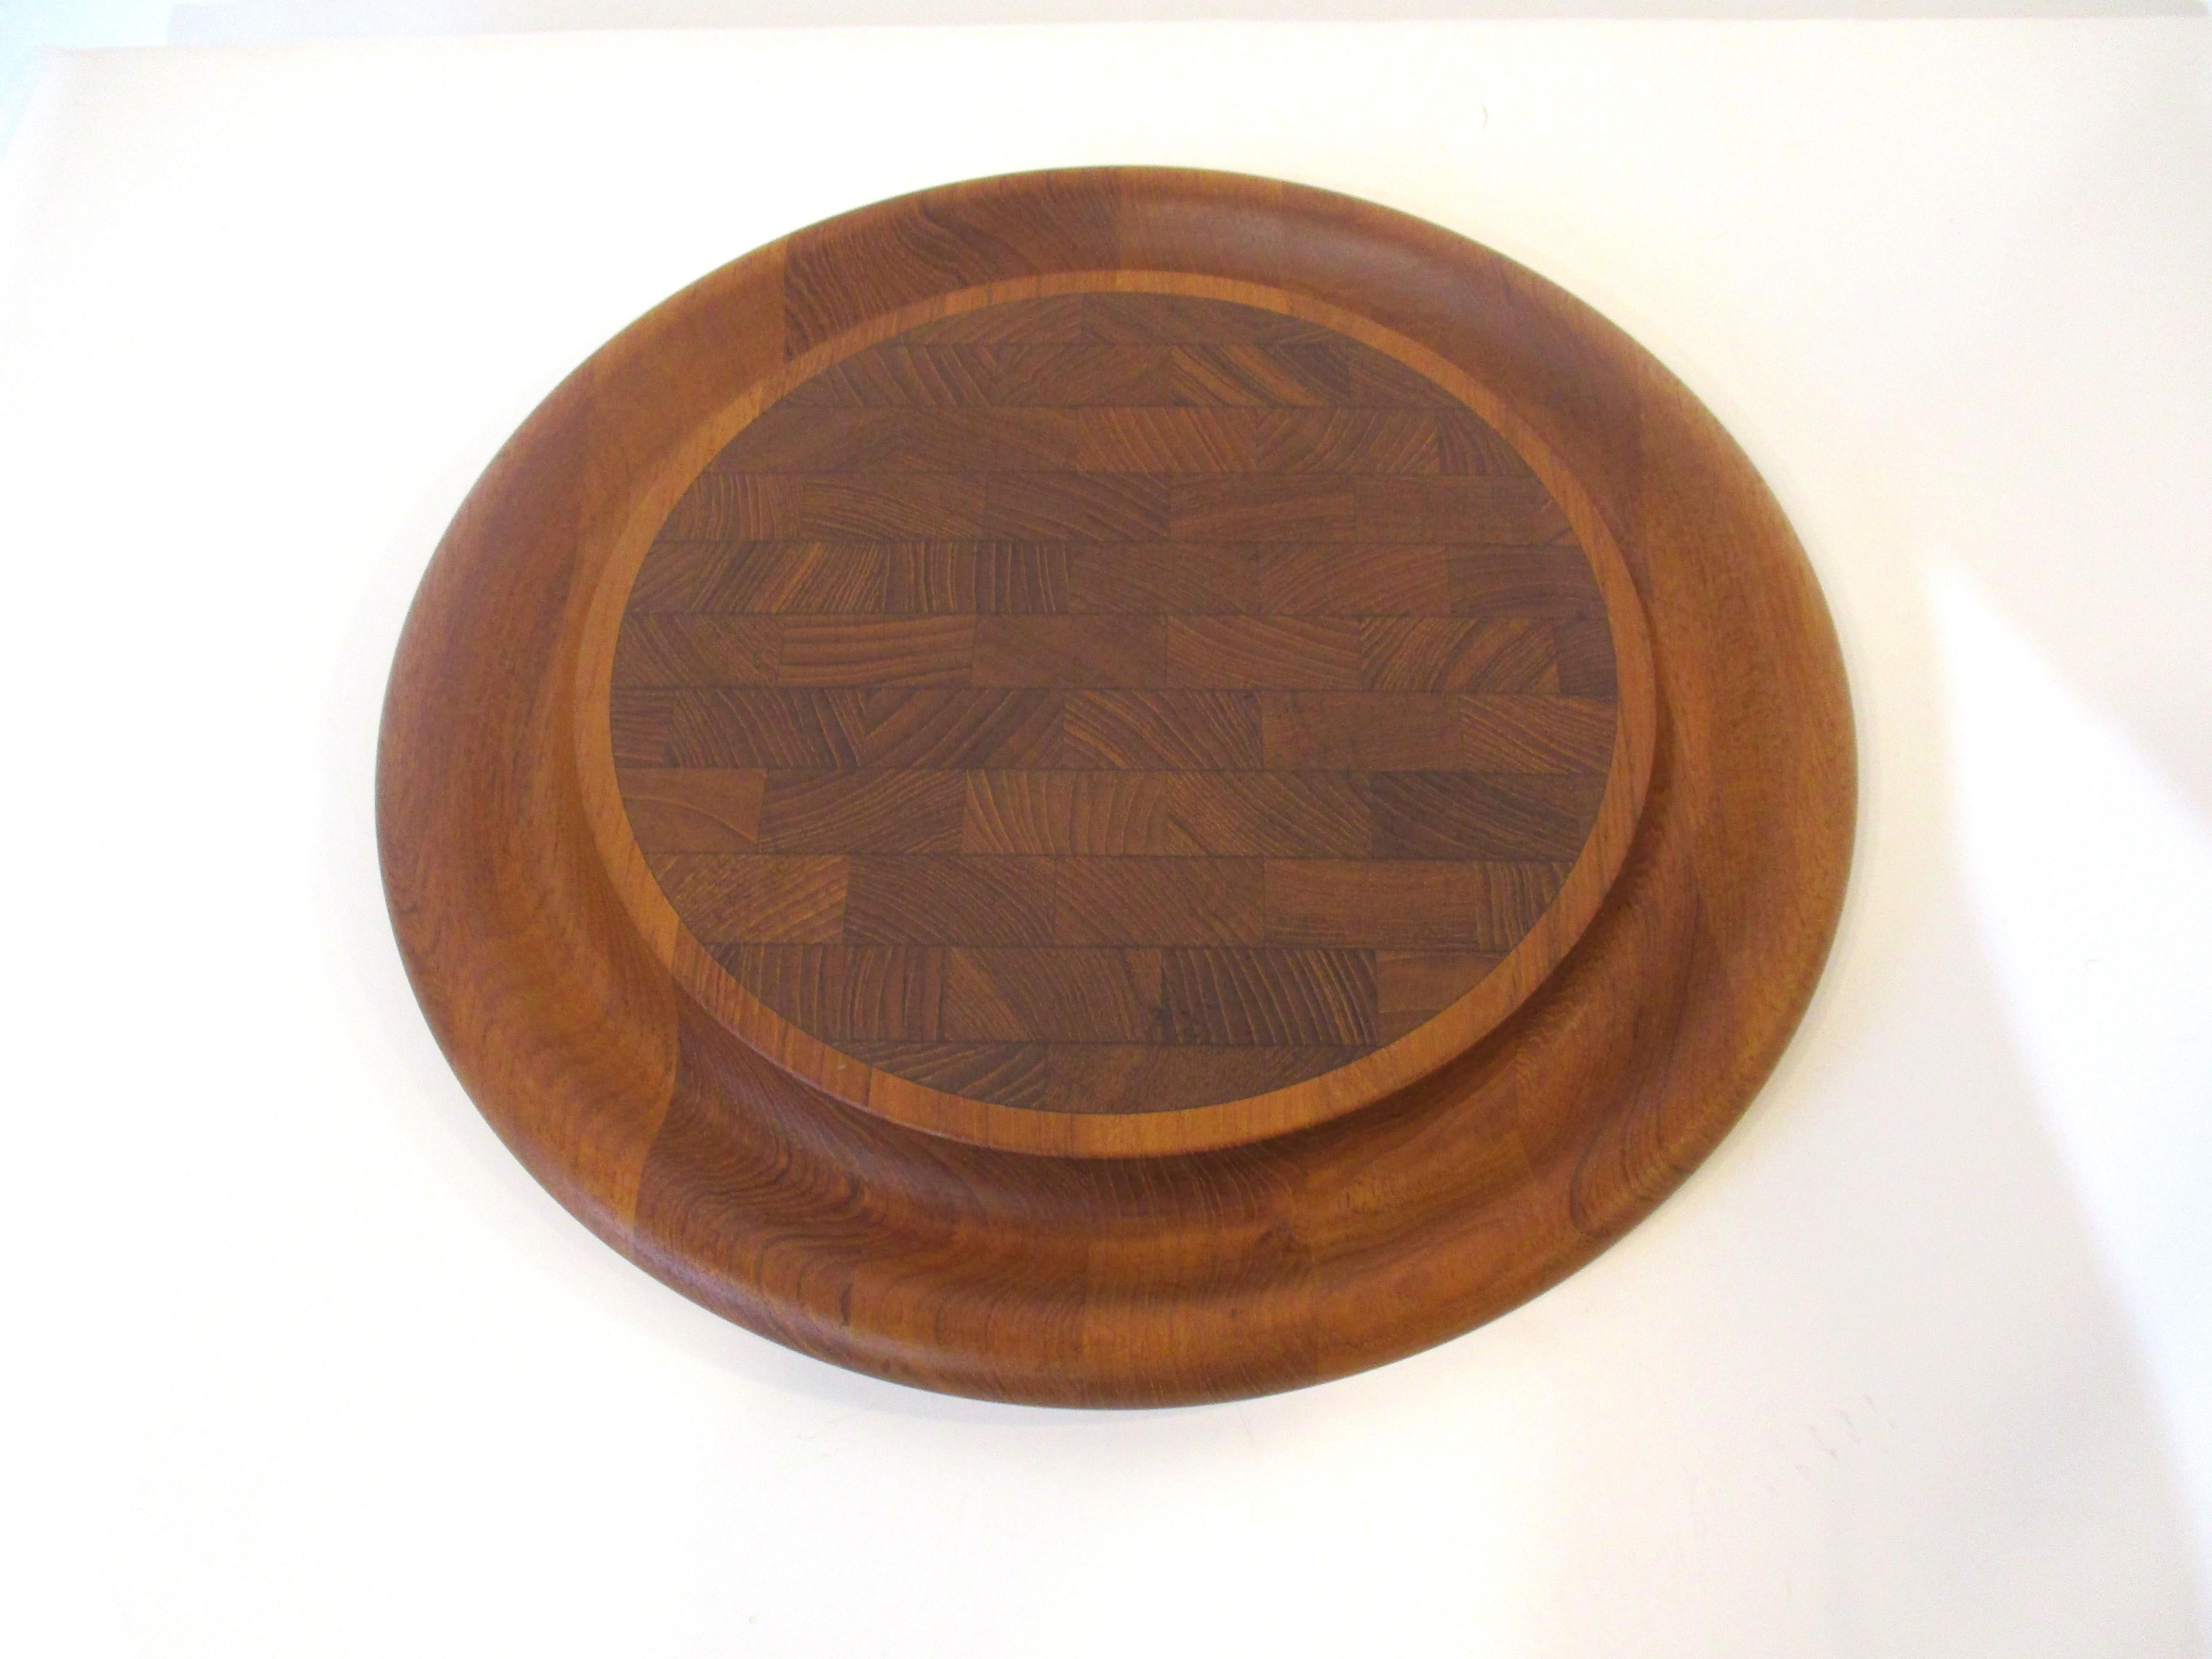 A very well crafted teakwood cheese and charcuterie board with center platform for the goodies and a lower rim for bread or crackers . Designed by Jens Quistgaard for Dansk noted for their great designs and simple elegance, made in Denmark.